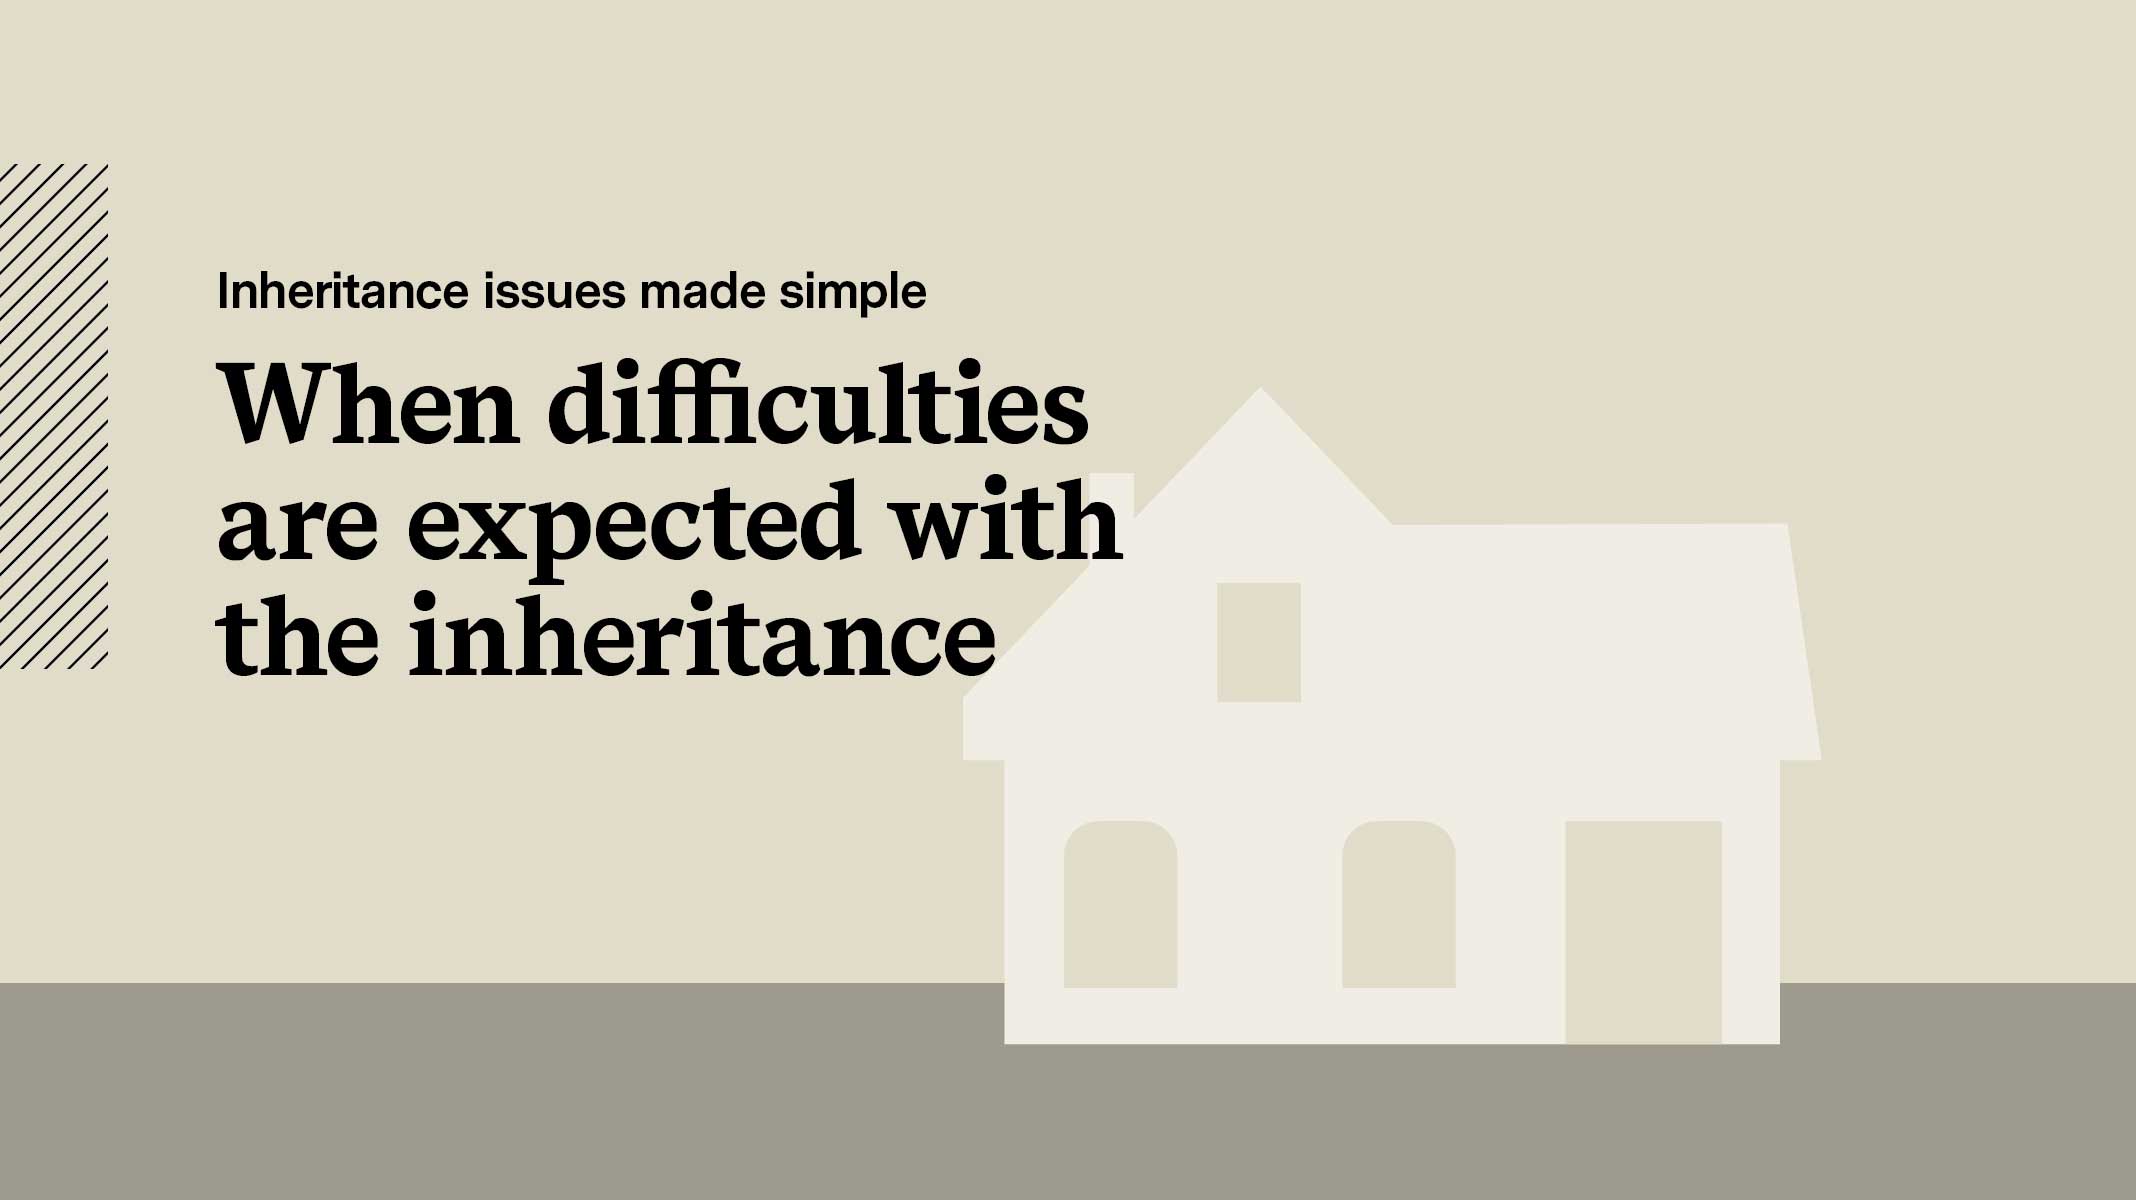 Slide 3: When difficulties are expected with the inheritance